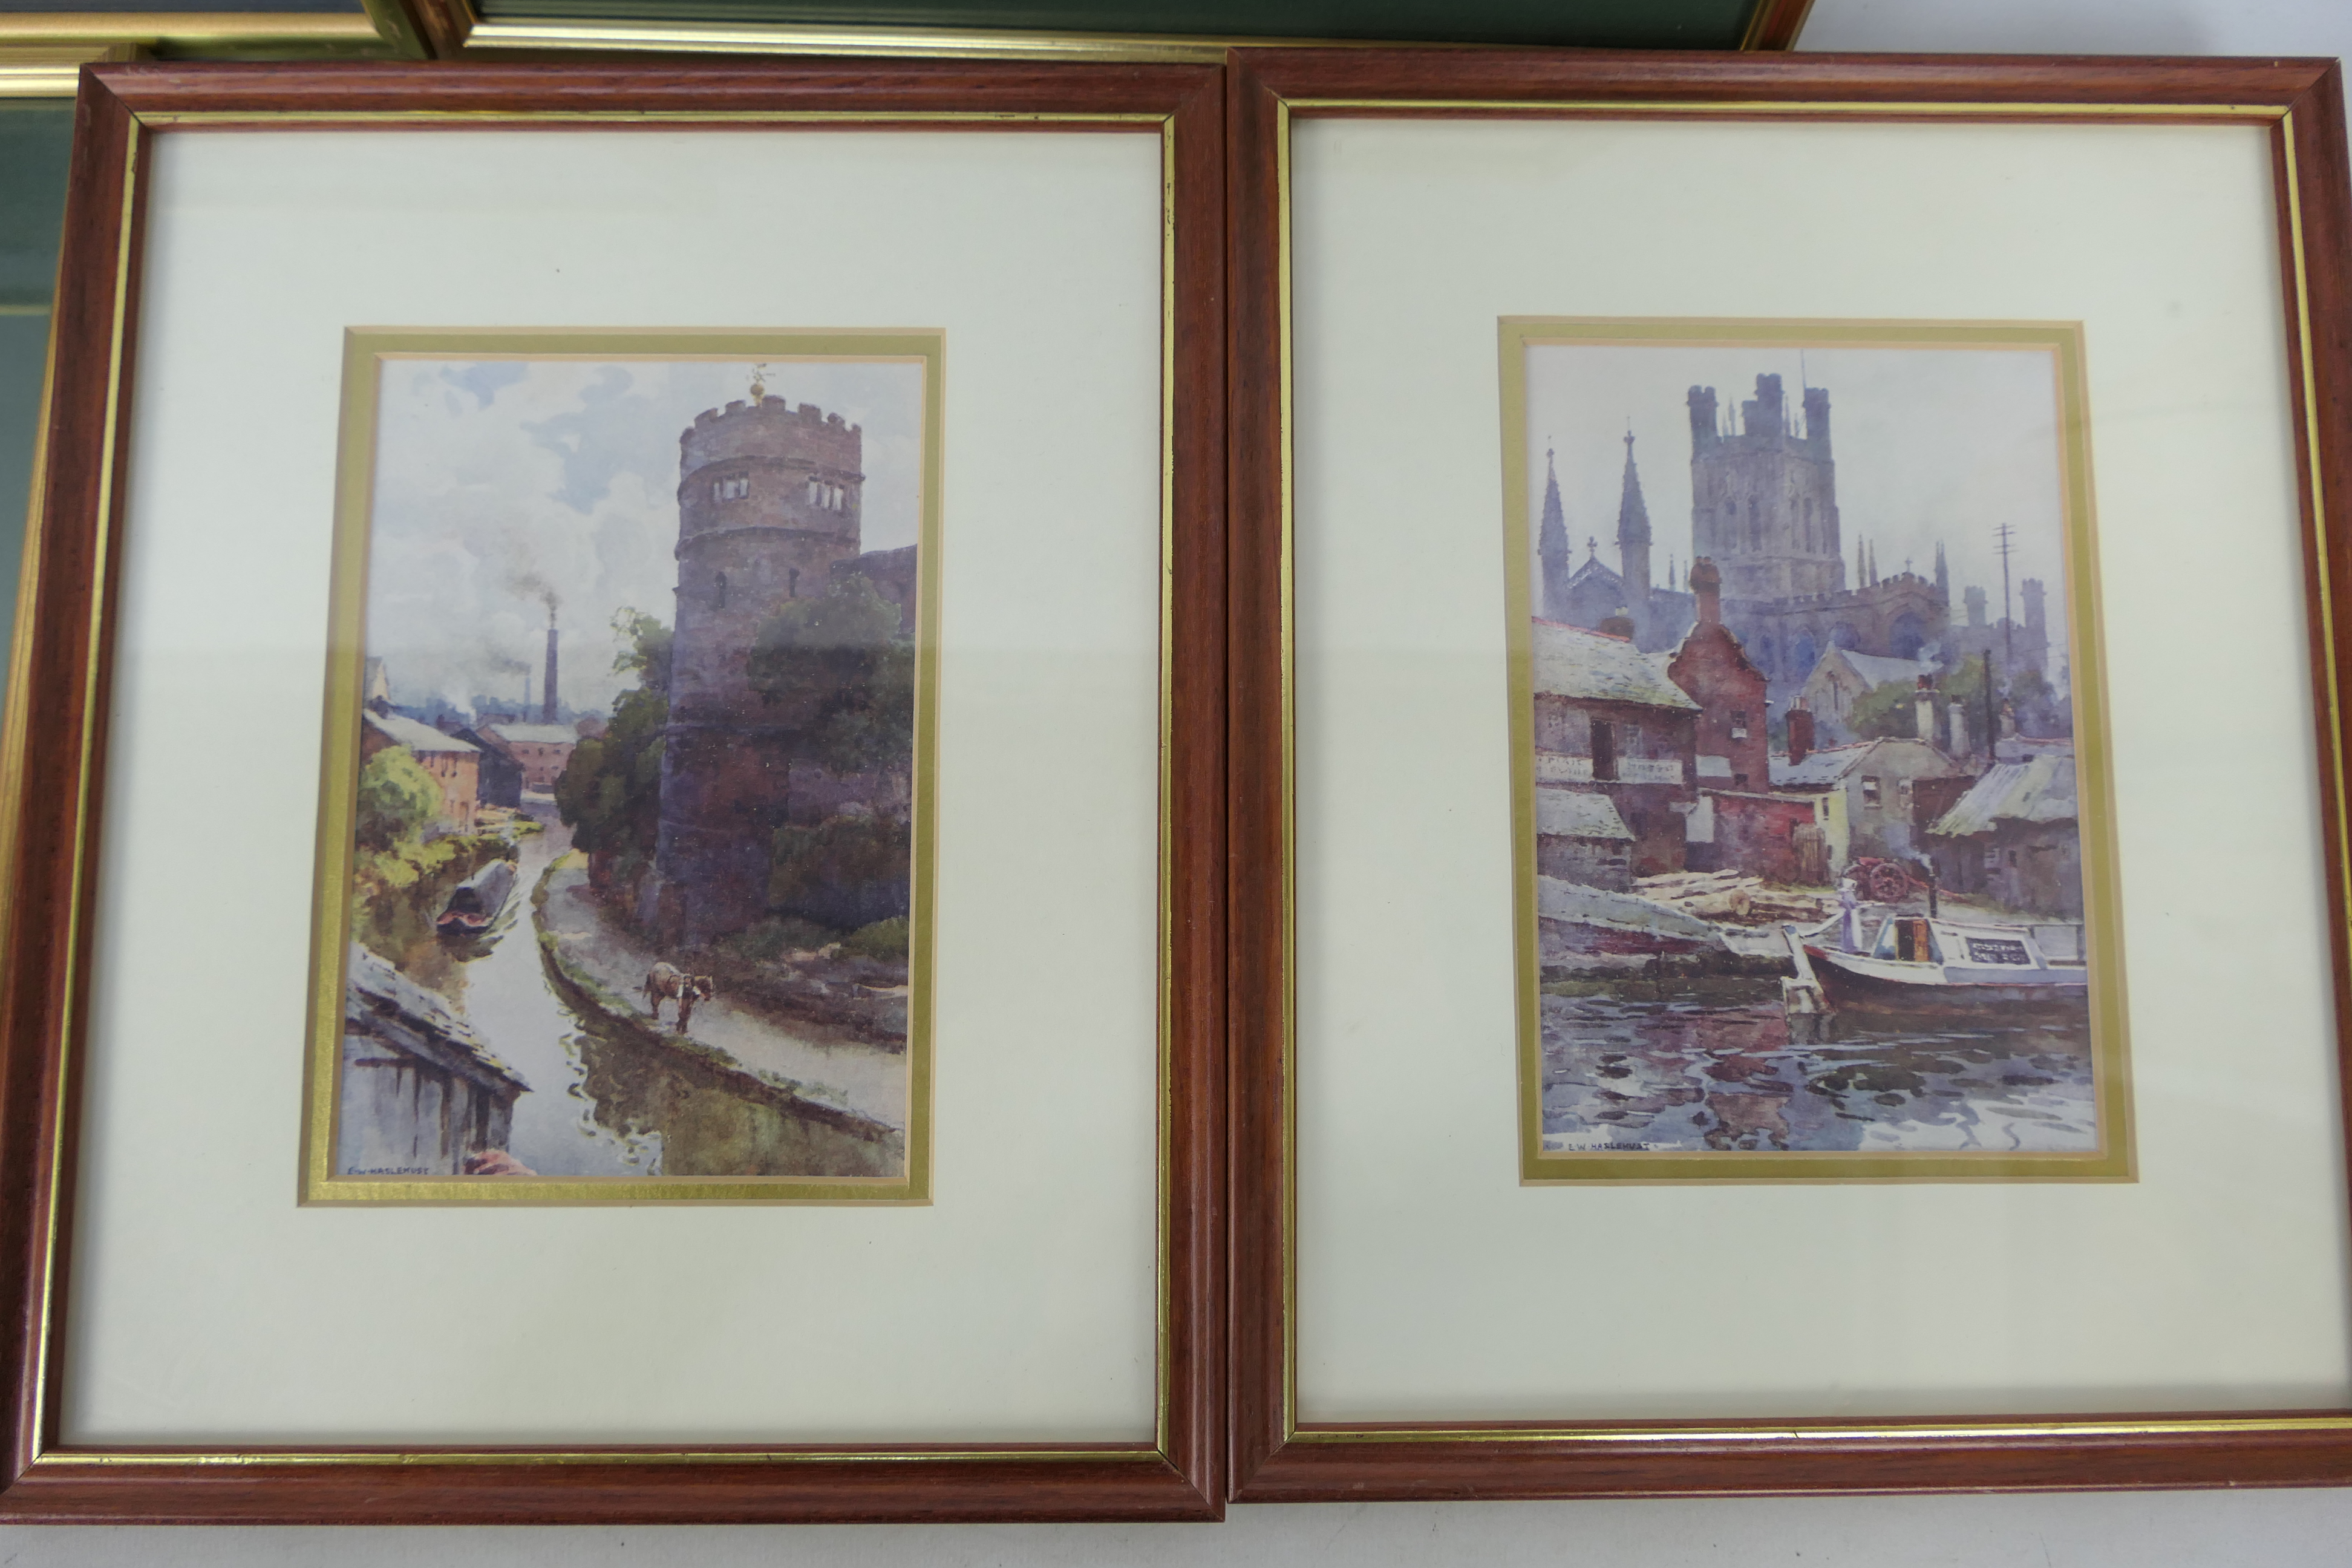 A collection of framed prints / engravings depicting scenes of Chester, - Image 3 of 6